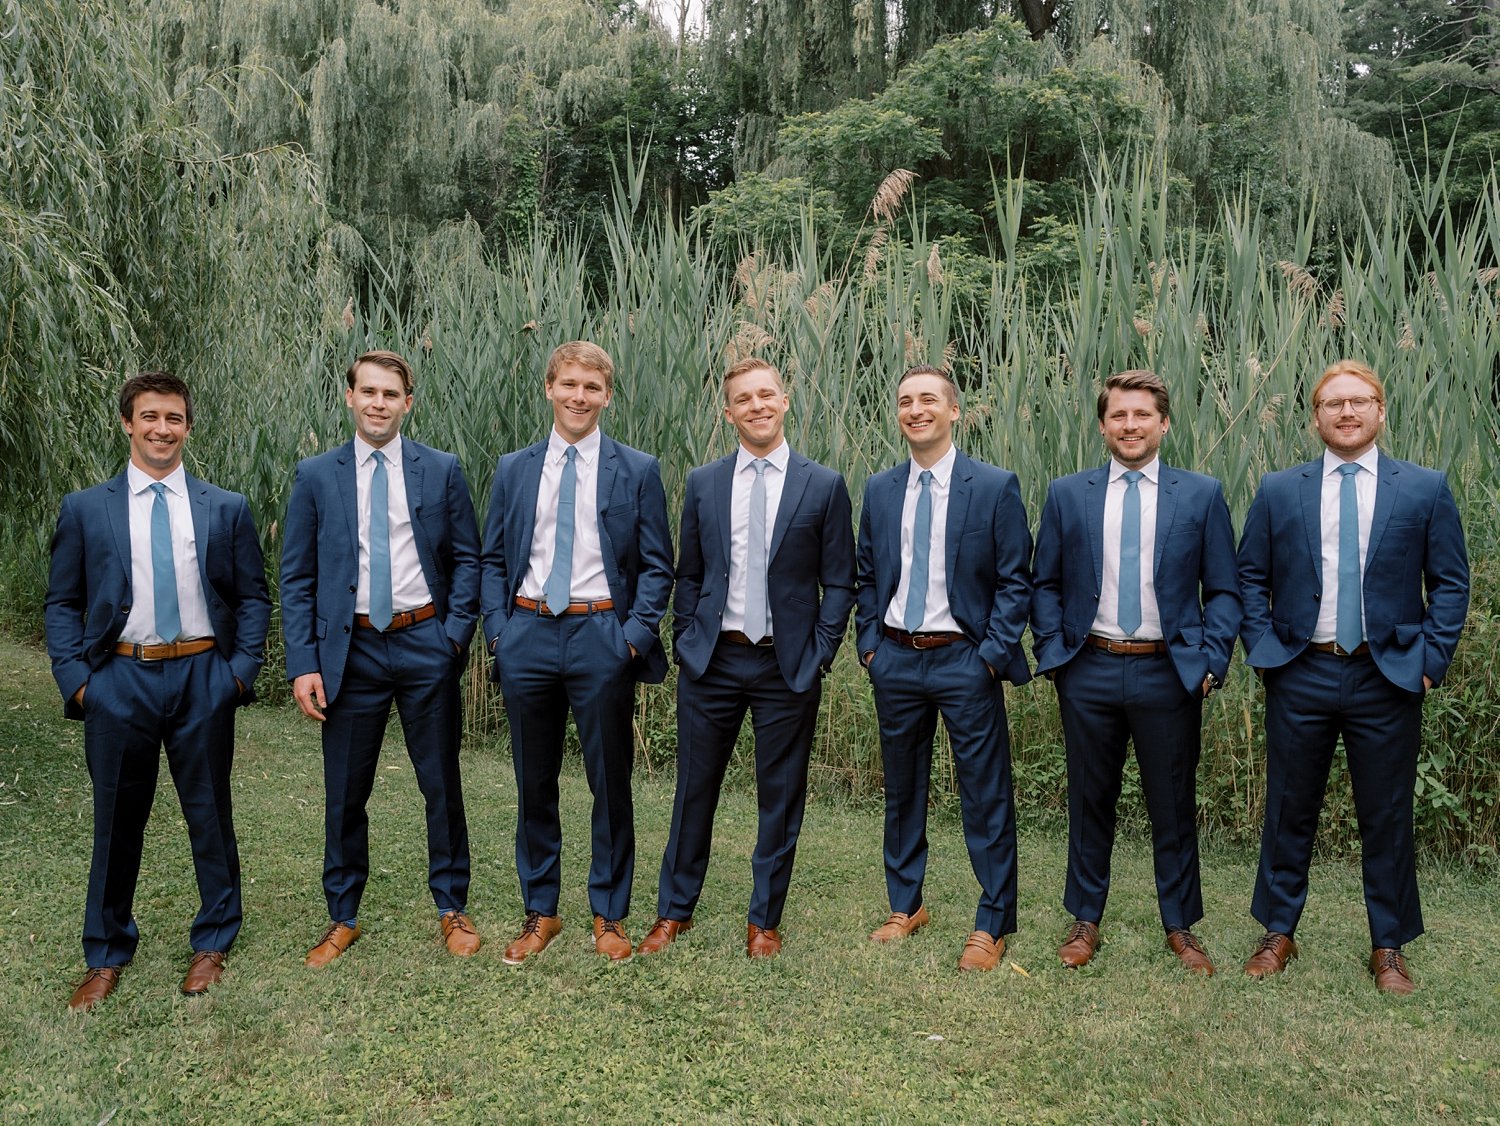 groom stands with groomsmen in navy suits with mint ties